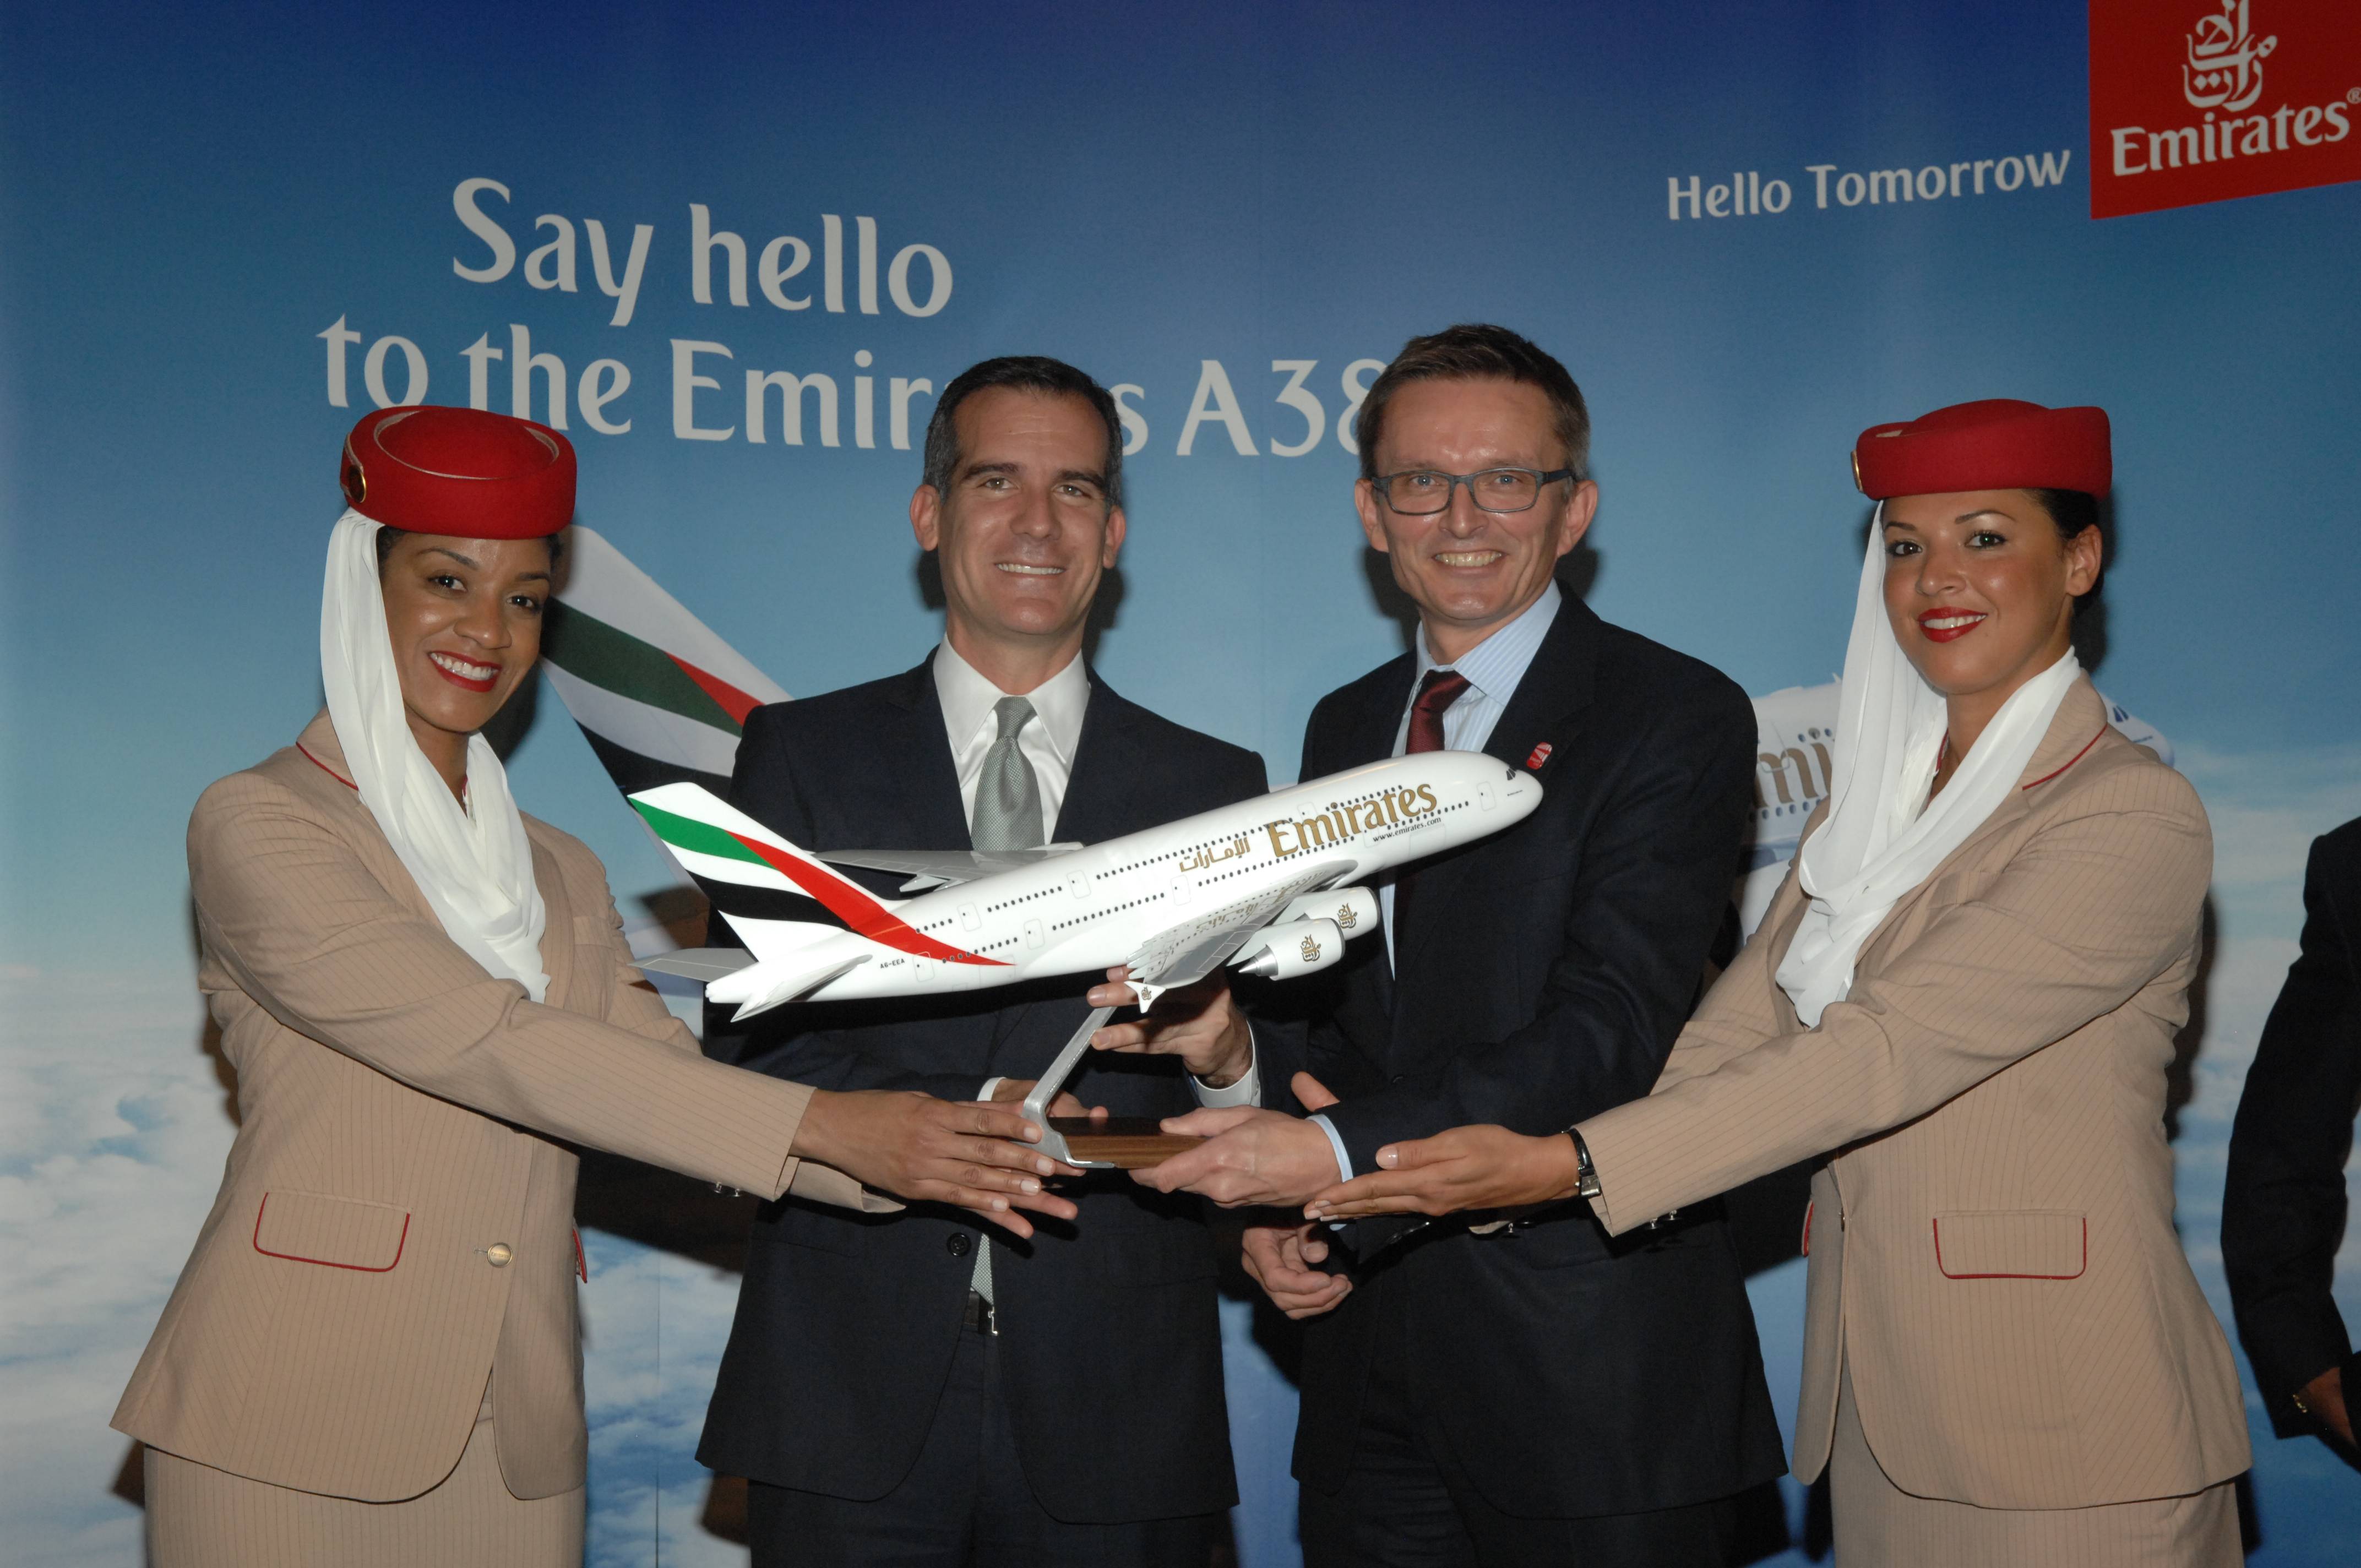 LA Mayor Eric Garcetti and Hubert Frach, Emirates' Divisional Senior Vice President Commerical Operations West Celebrate the Arrival of Emirates' A380 in LA